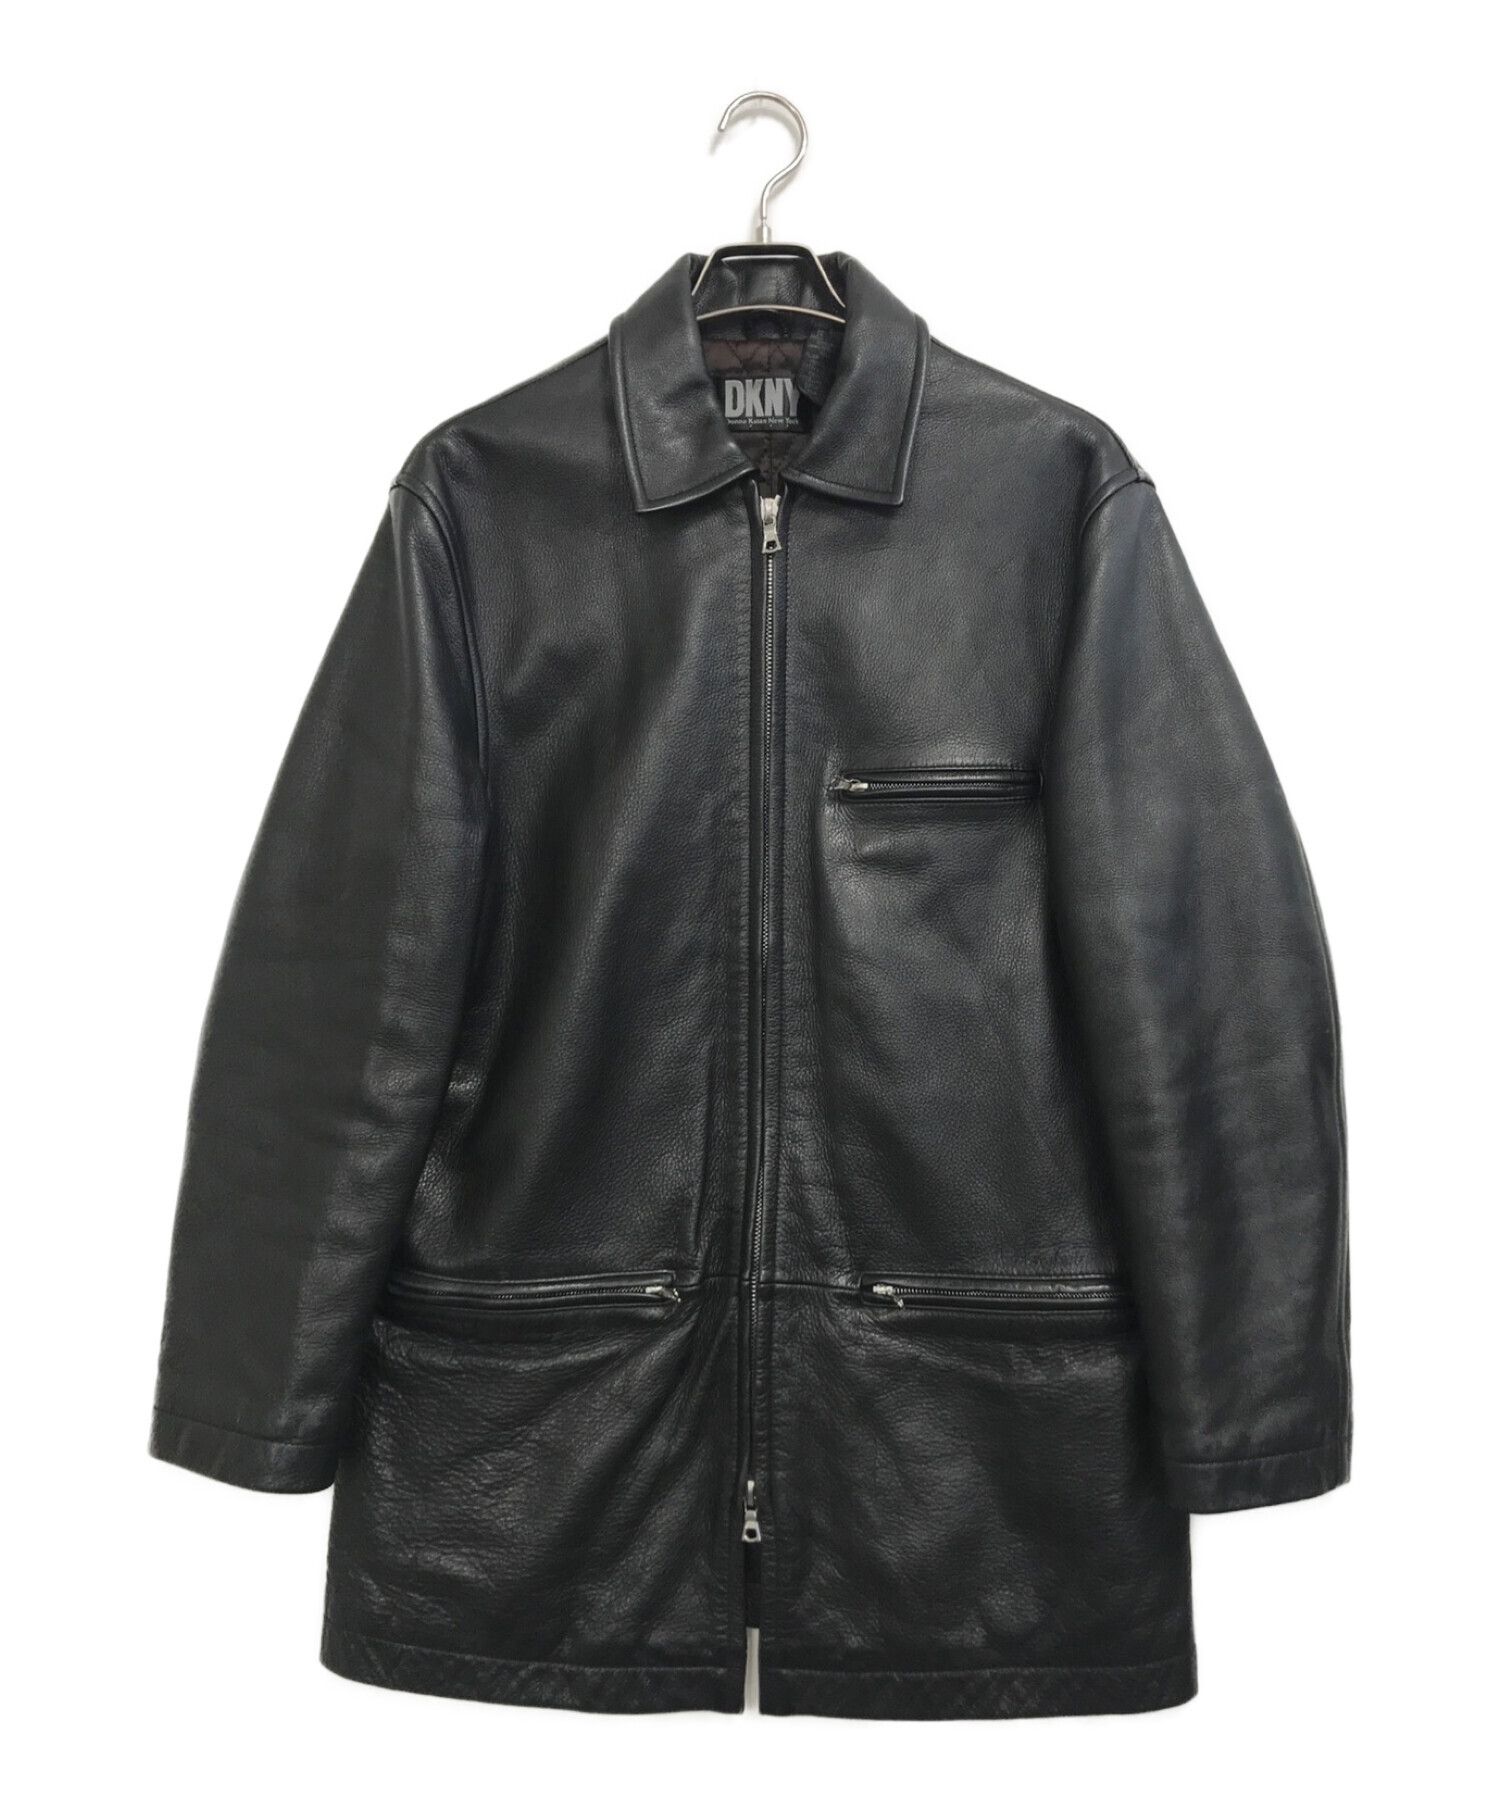 DKNY leather car coat | camillevieraservices.com